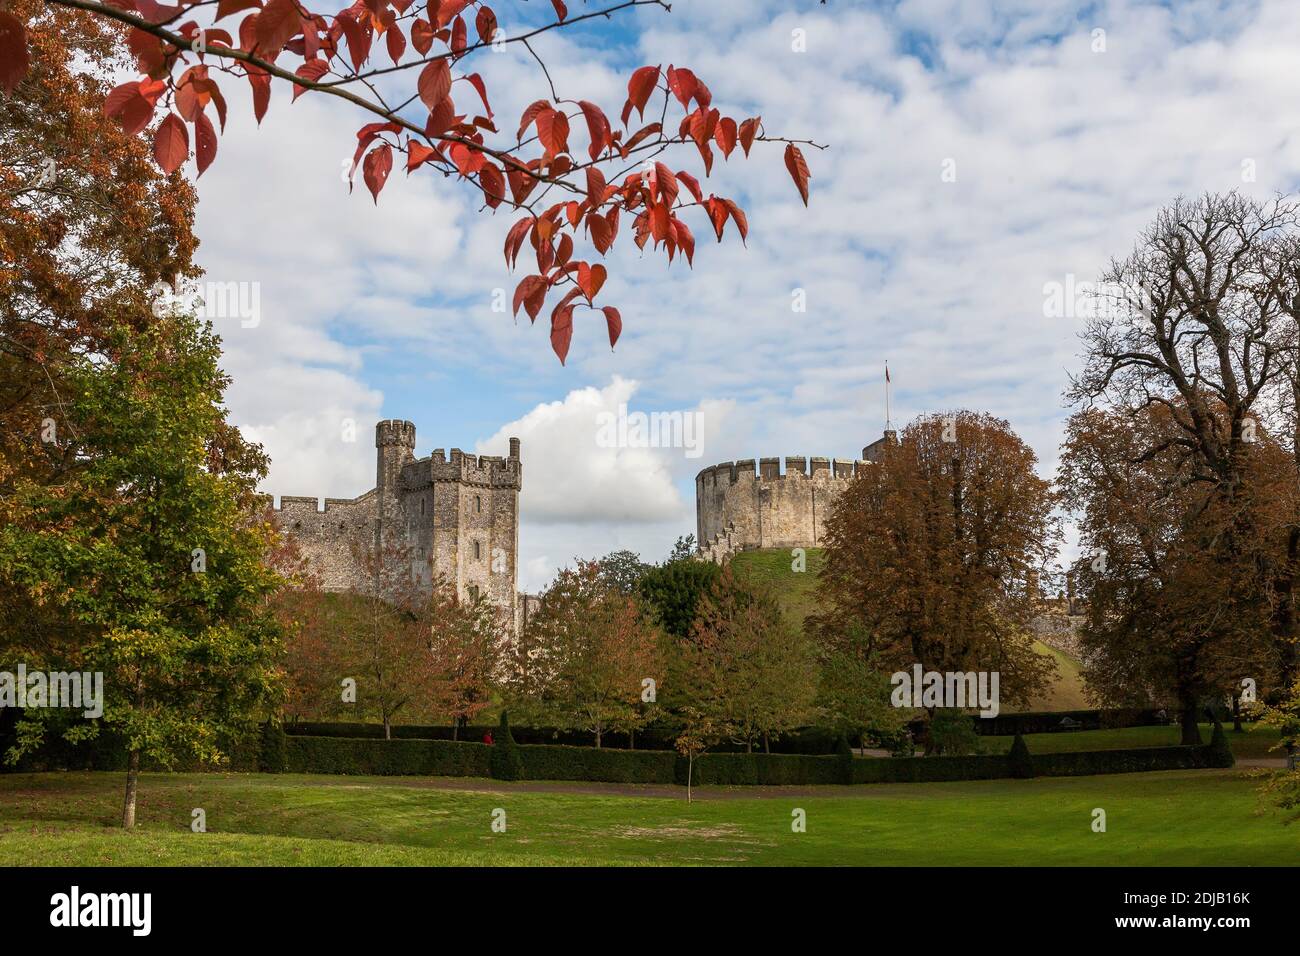 The 13th century Bevis Tower and original Norman 20 metre-high motte, surmounted by the 12th century keep, Arundel Castle, West Sussex, England, UK Stock Photo